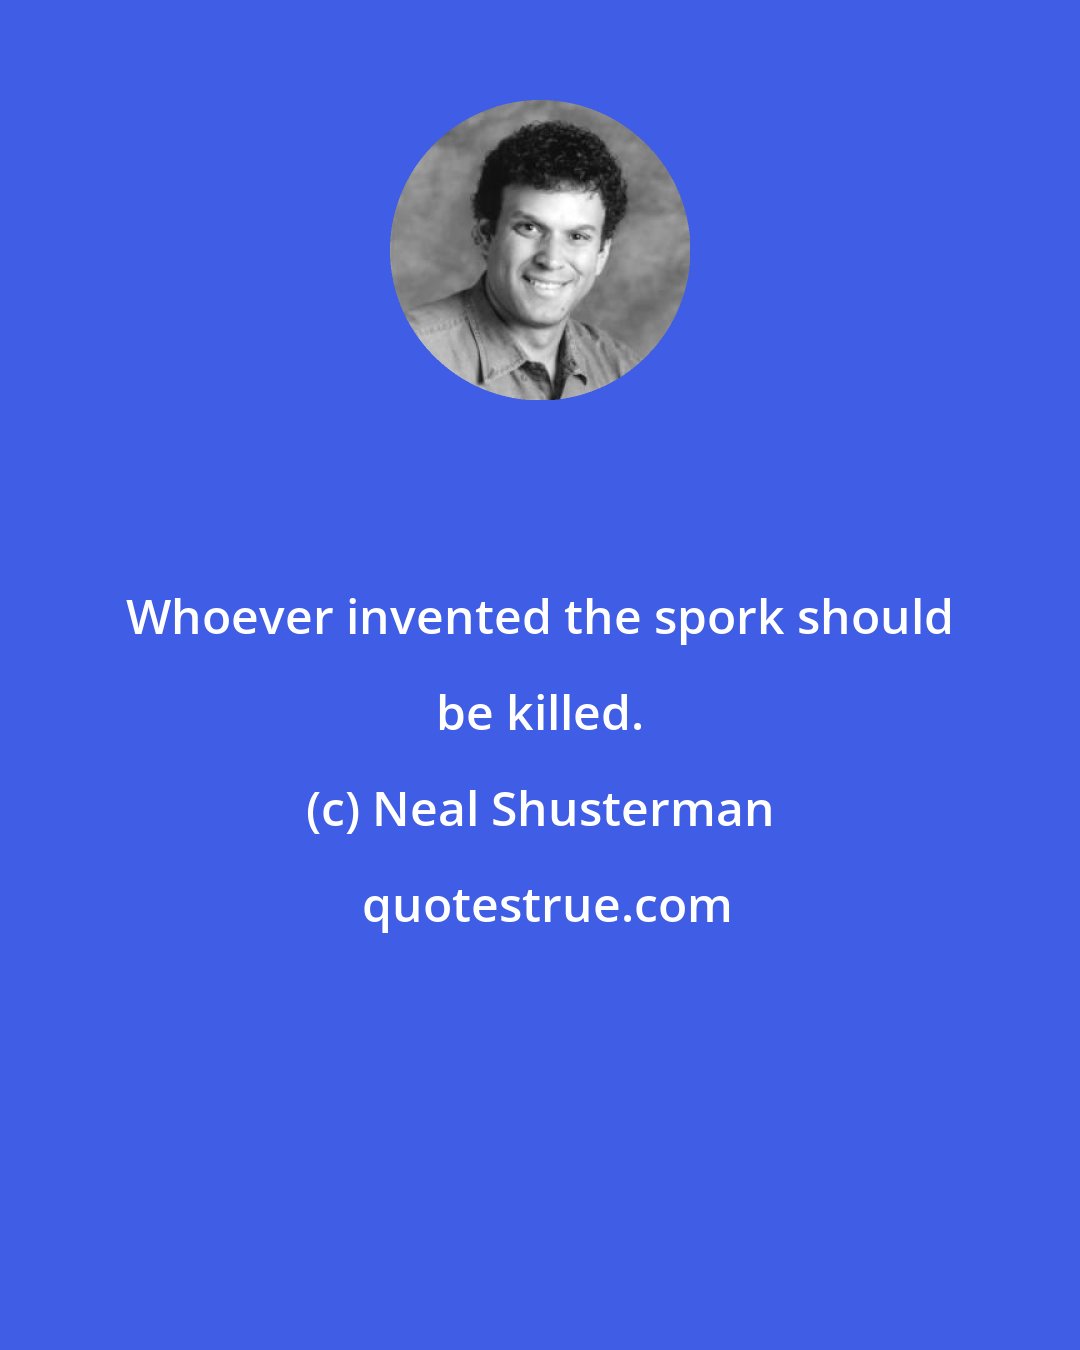 Neal Shusterman: Whoever invented the spork should be killed.